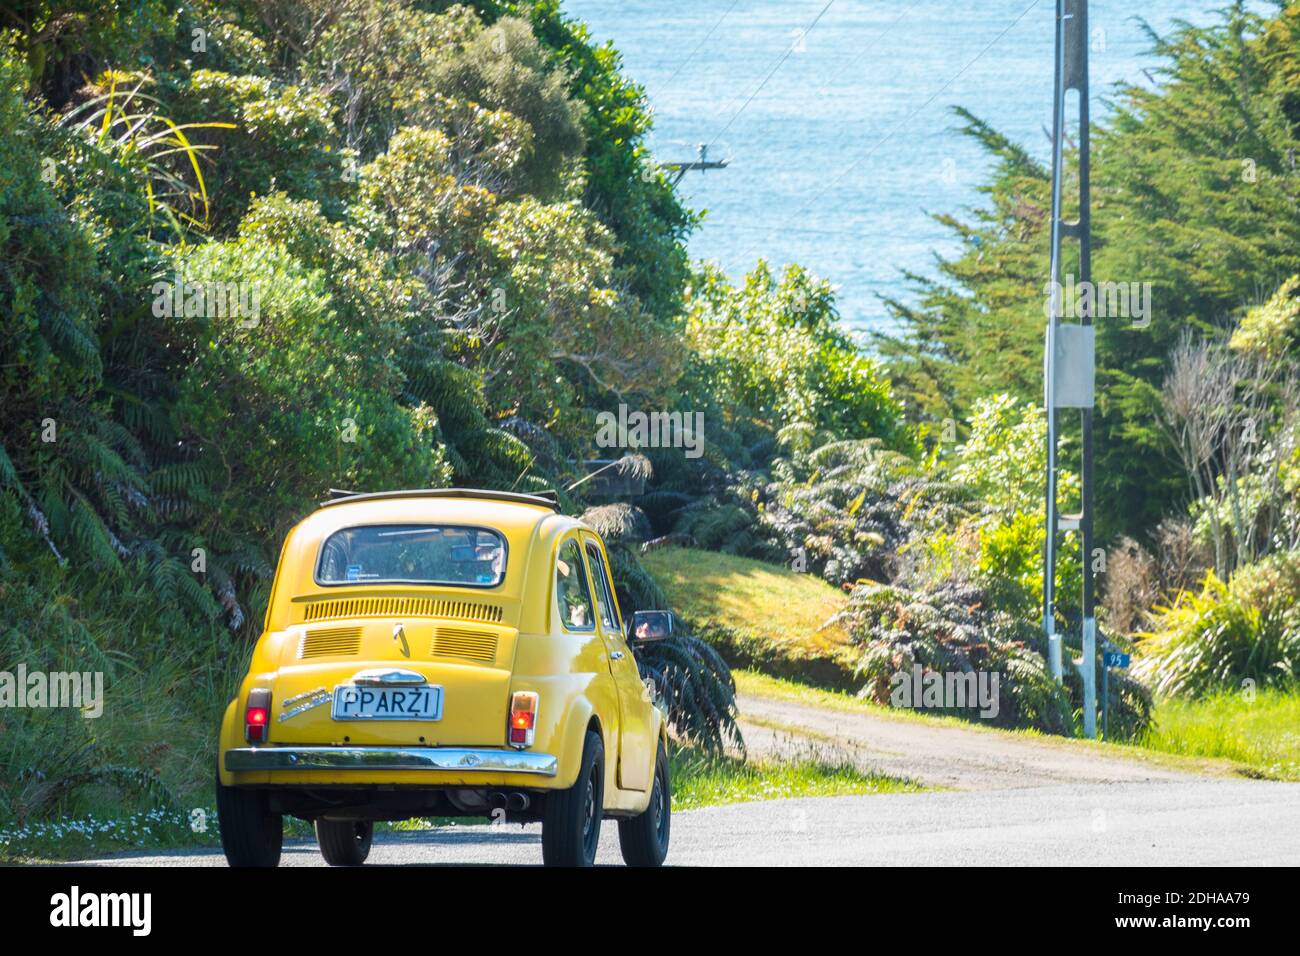 Oban New Zealand - November 3 2020; Bright yellow quirky Fiat Bambina driving past on road Stock Photo